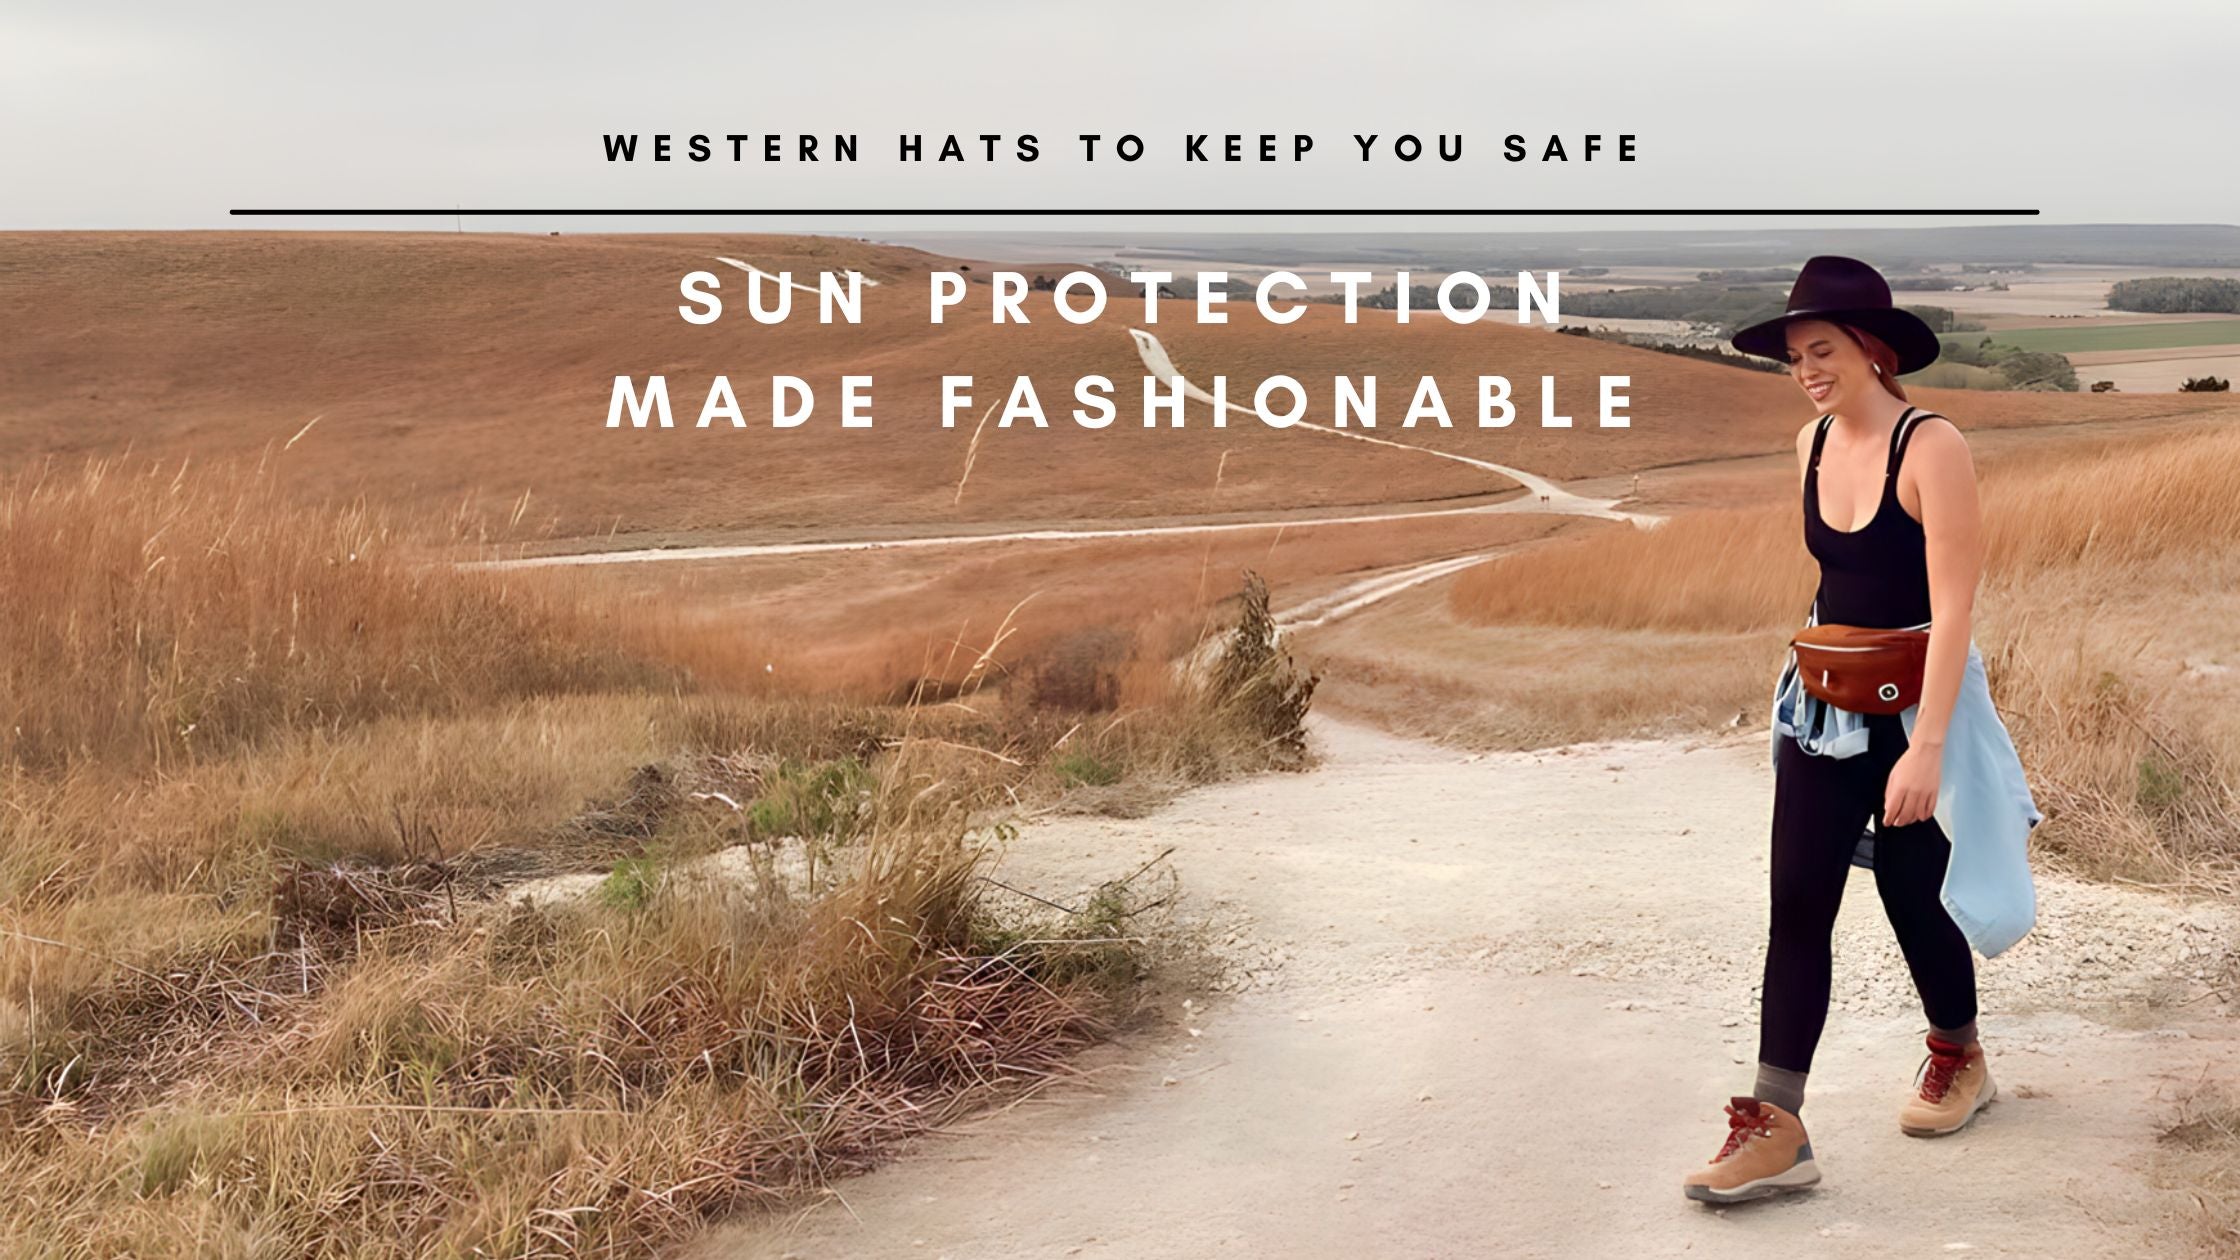 Sun Protection Made Fashionable: Western Hats to Keep You Safe